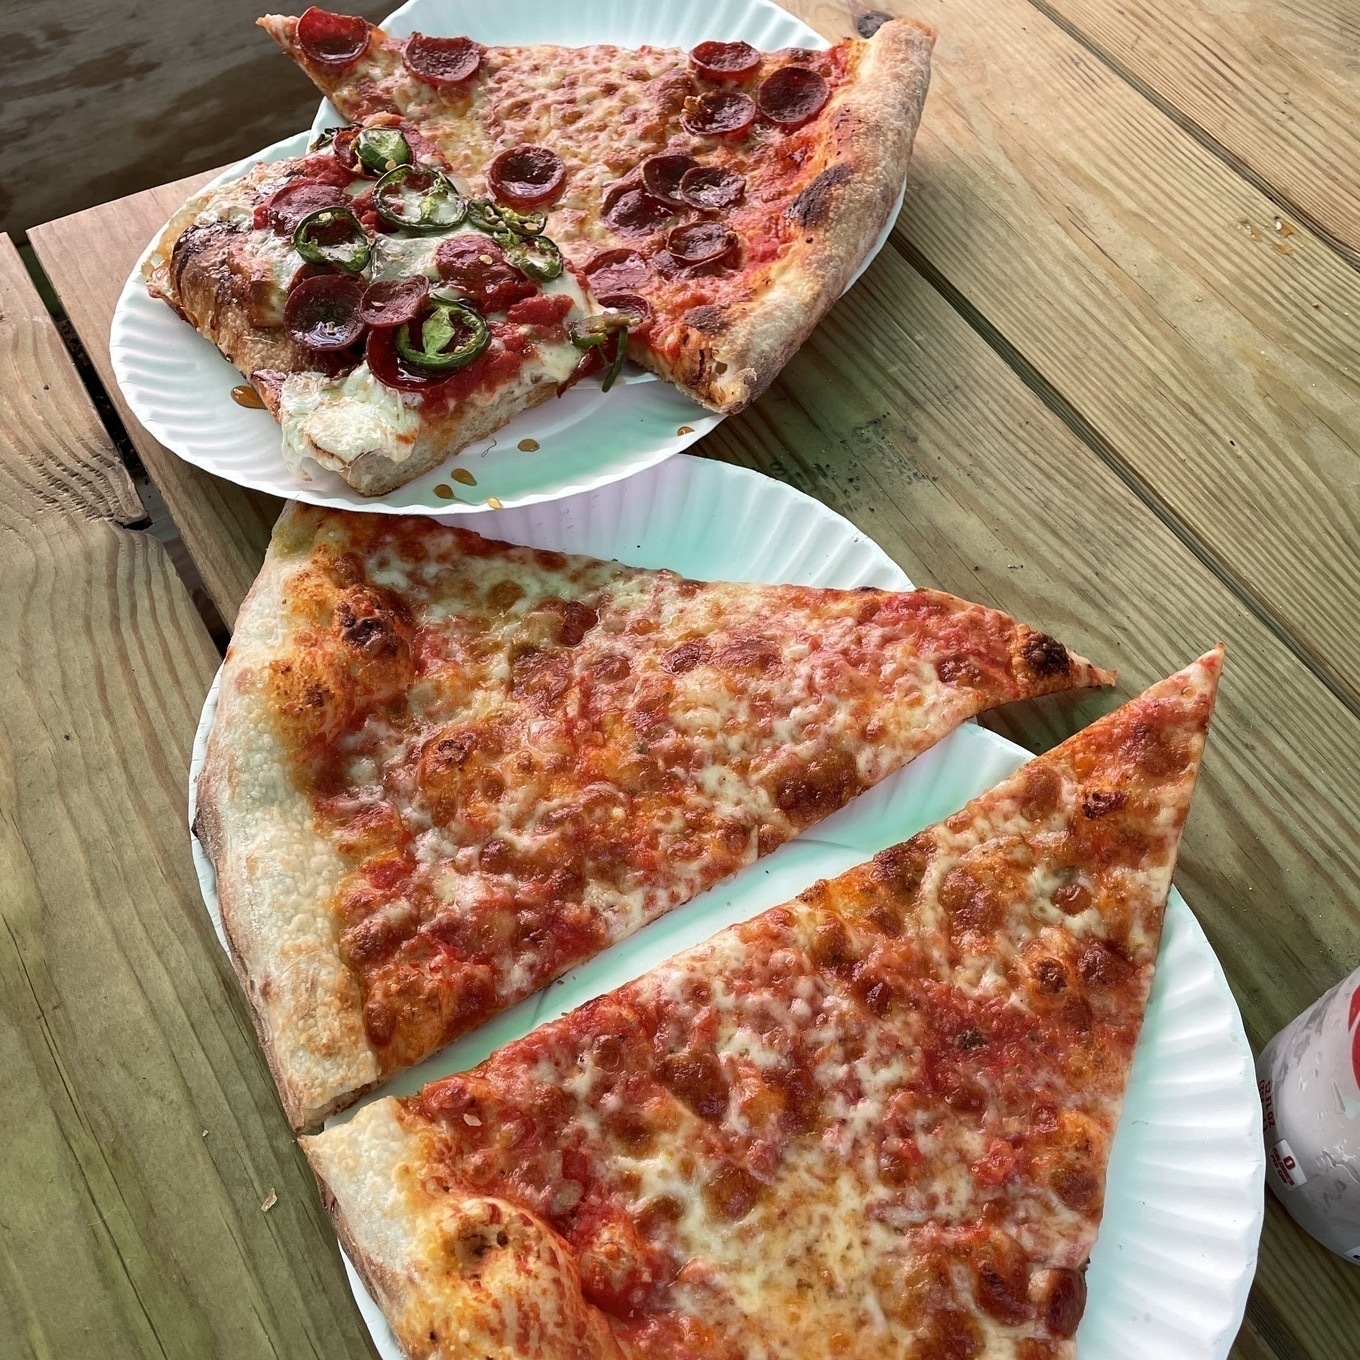 Slices from Scarr's